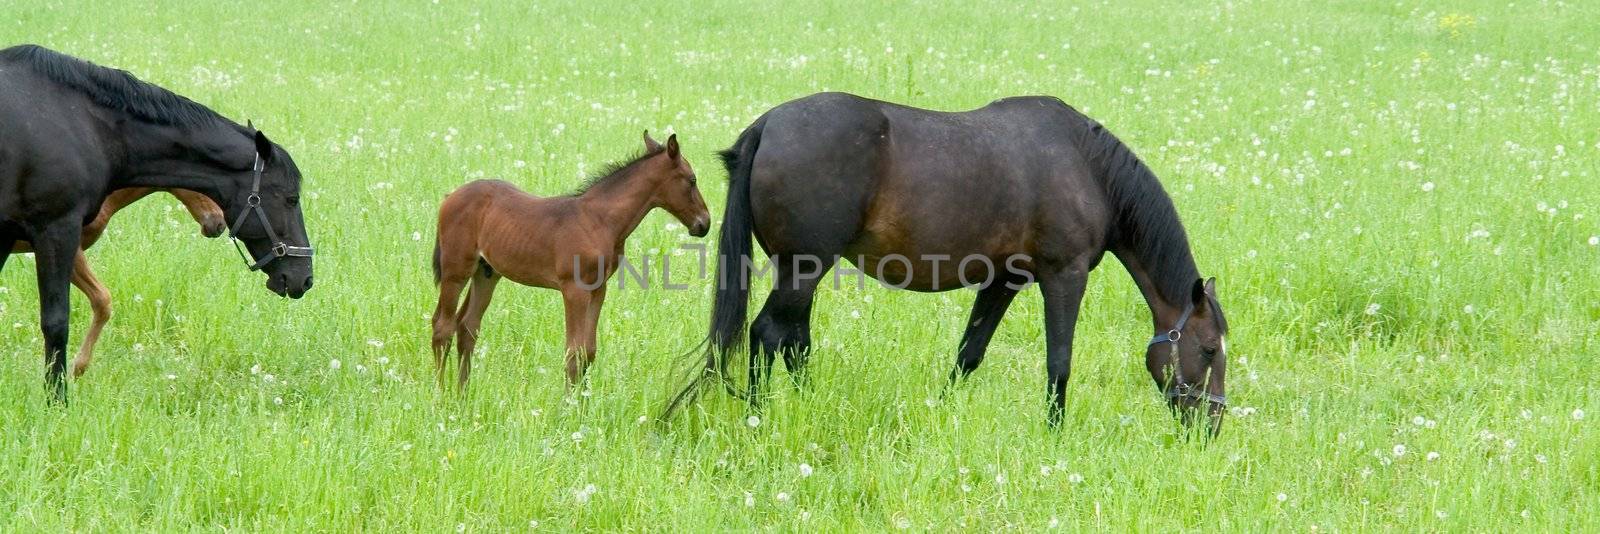 Bay mare and foal by stepanov